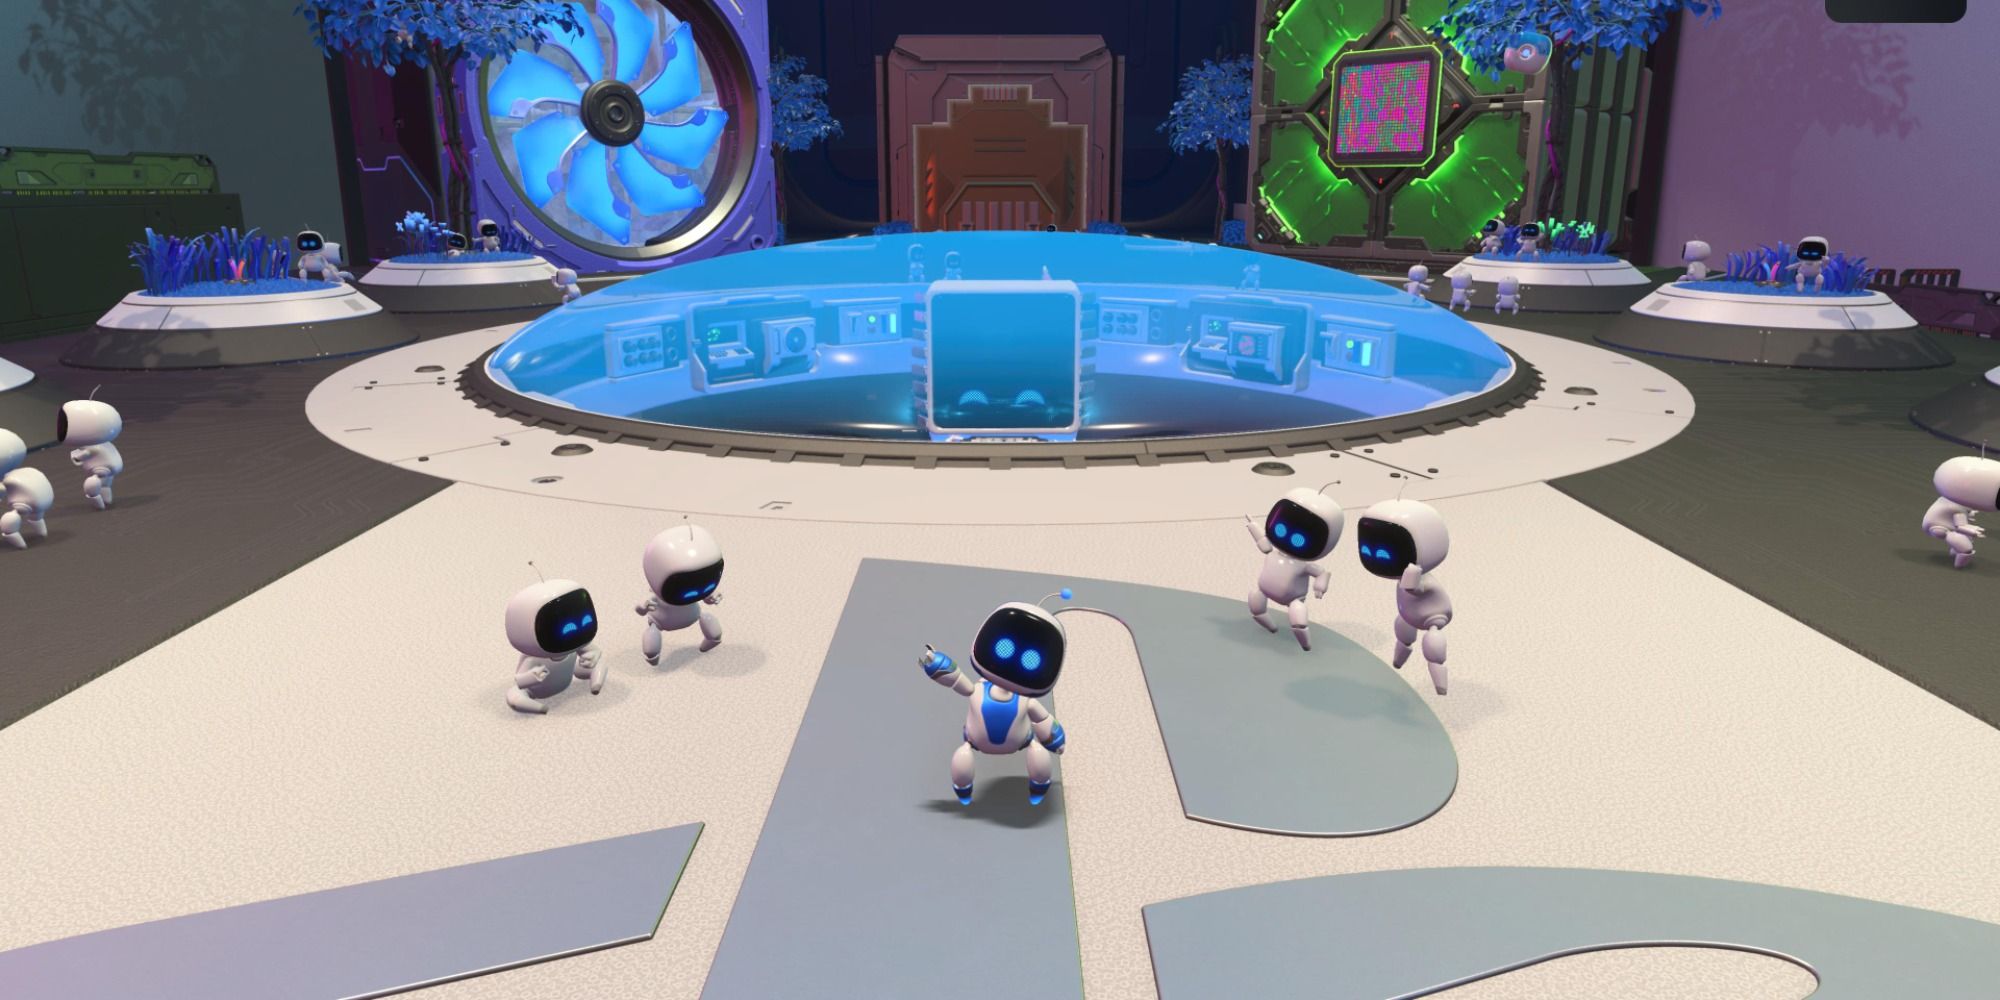 Astro's Playroom Astro waving at camera in hub with other bots around him on the logo